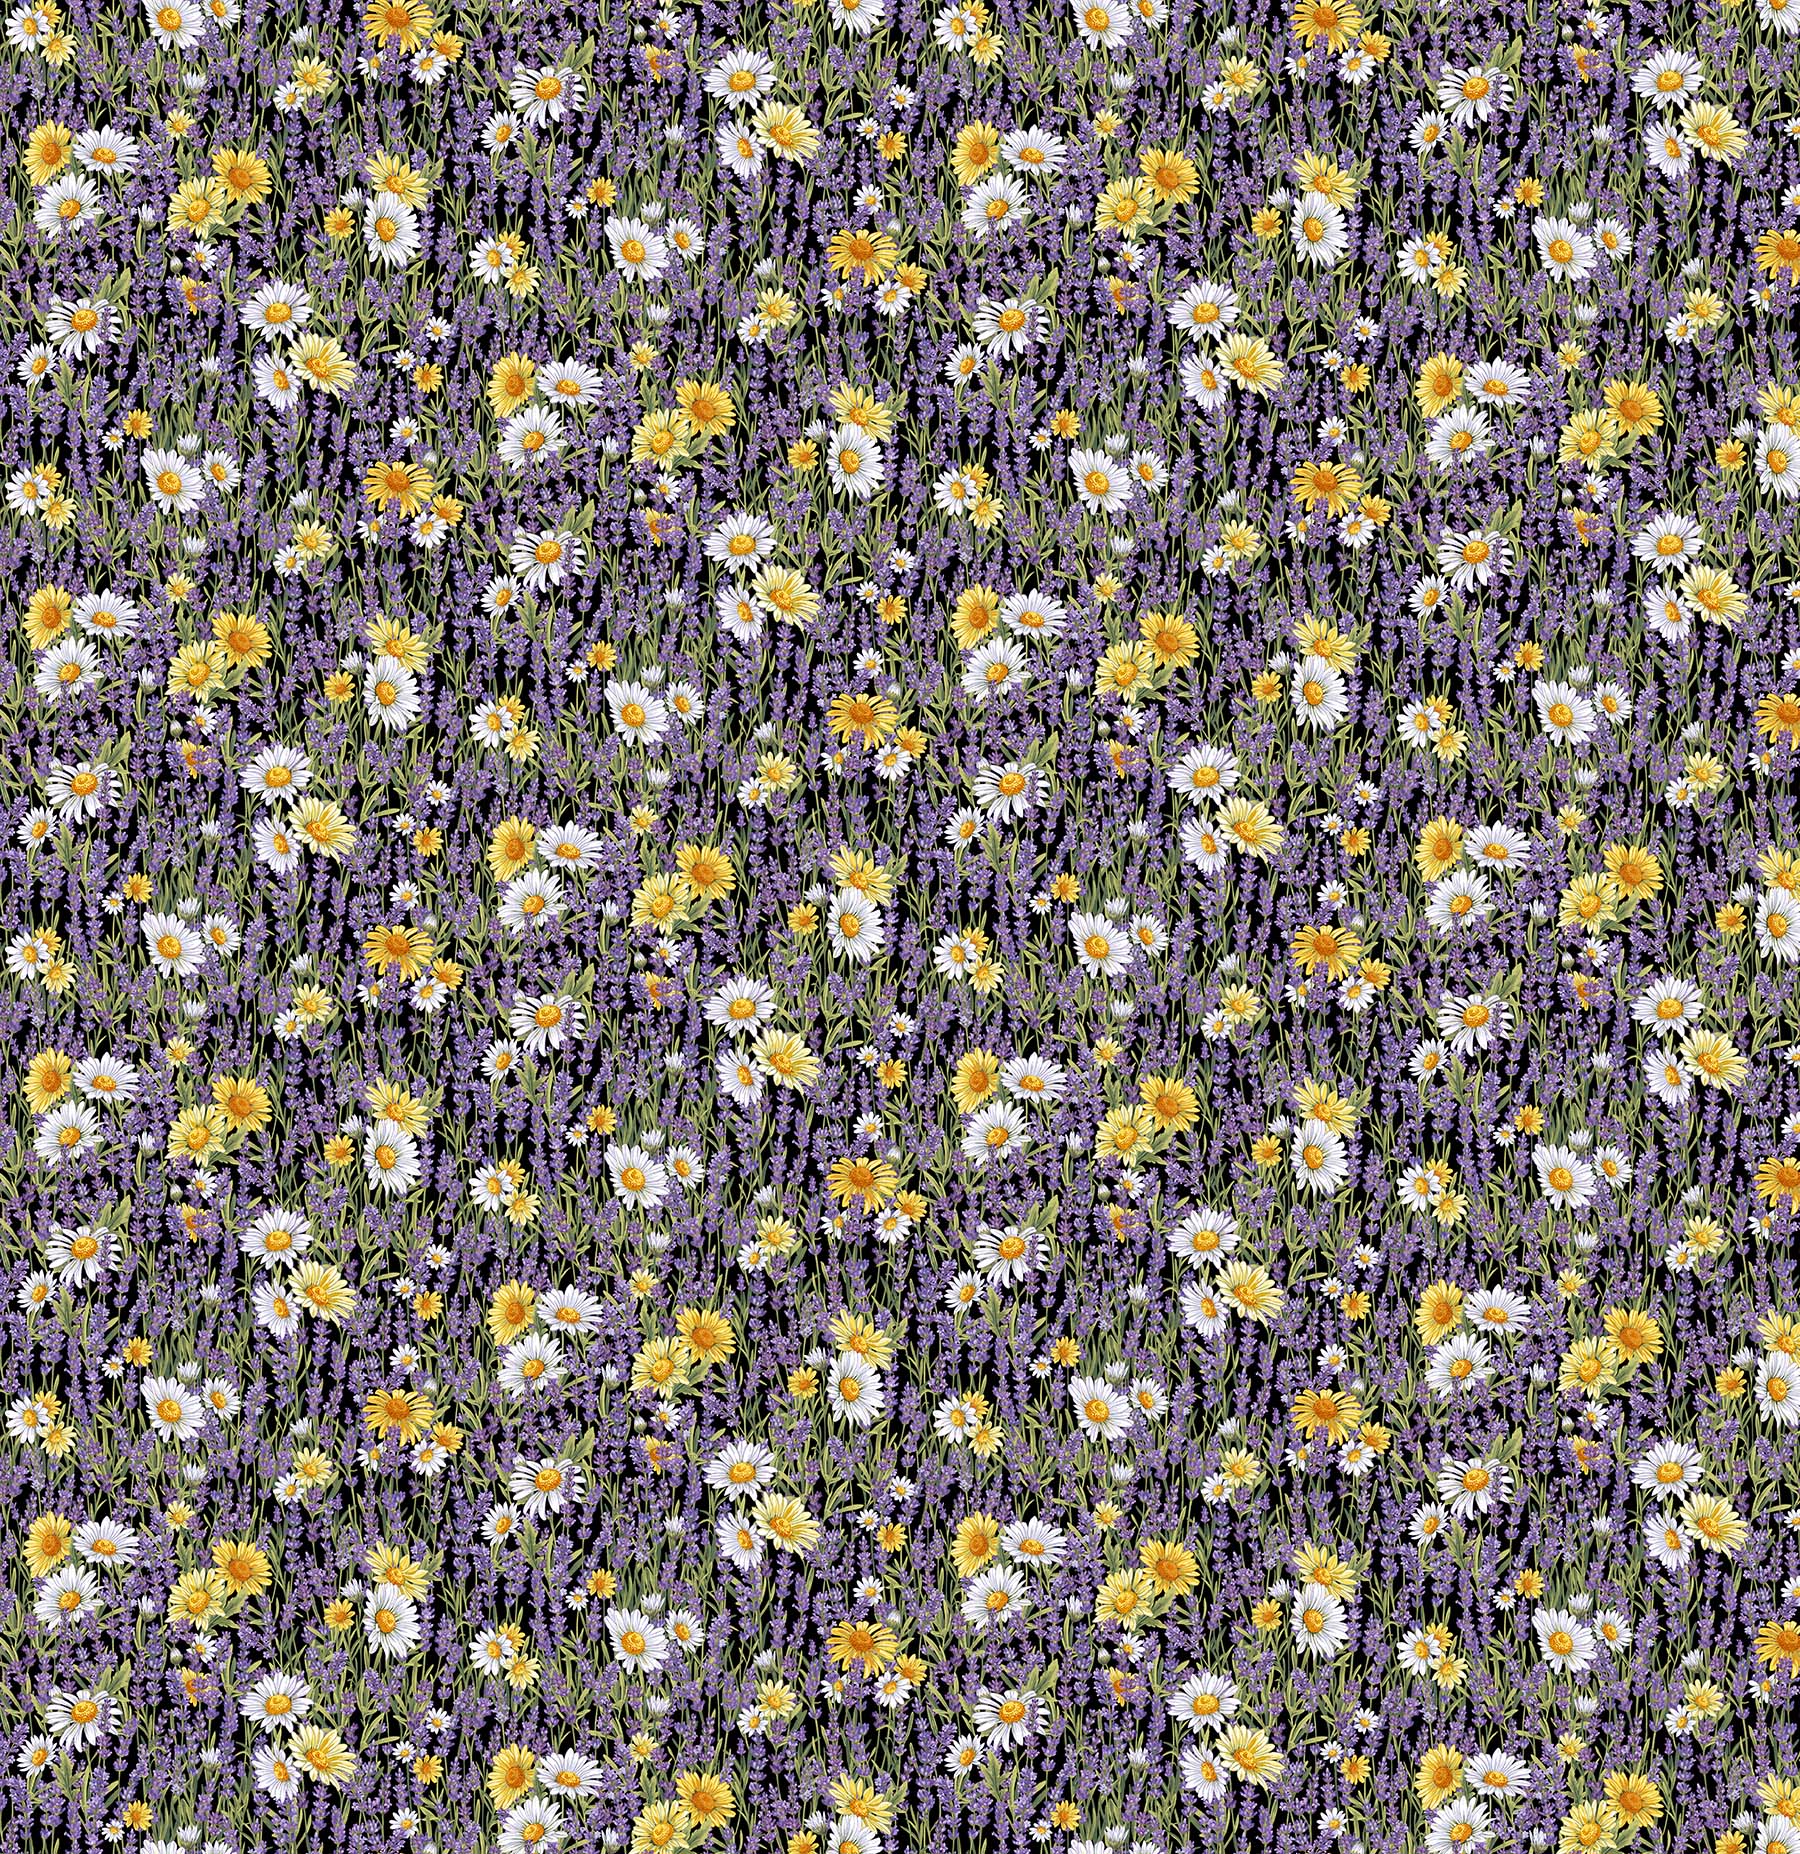 Lavender Market 100% Cotton Fabric - By the Yard - 24473-99 - Lavender and Daisies - Black Multi